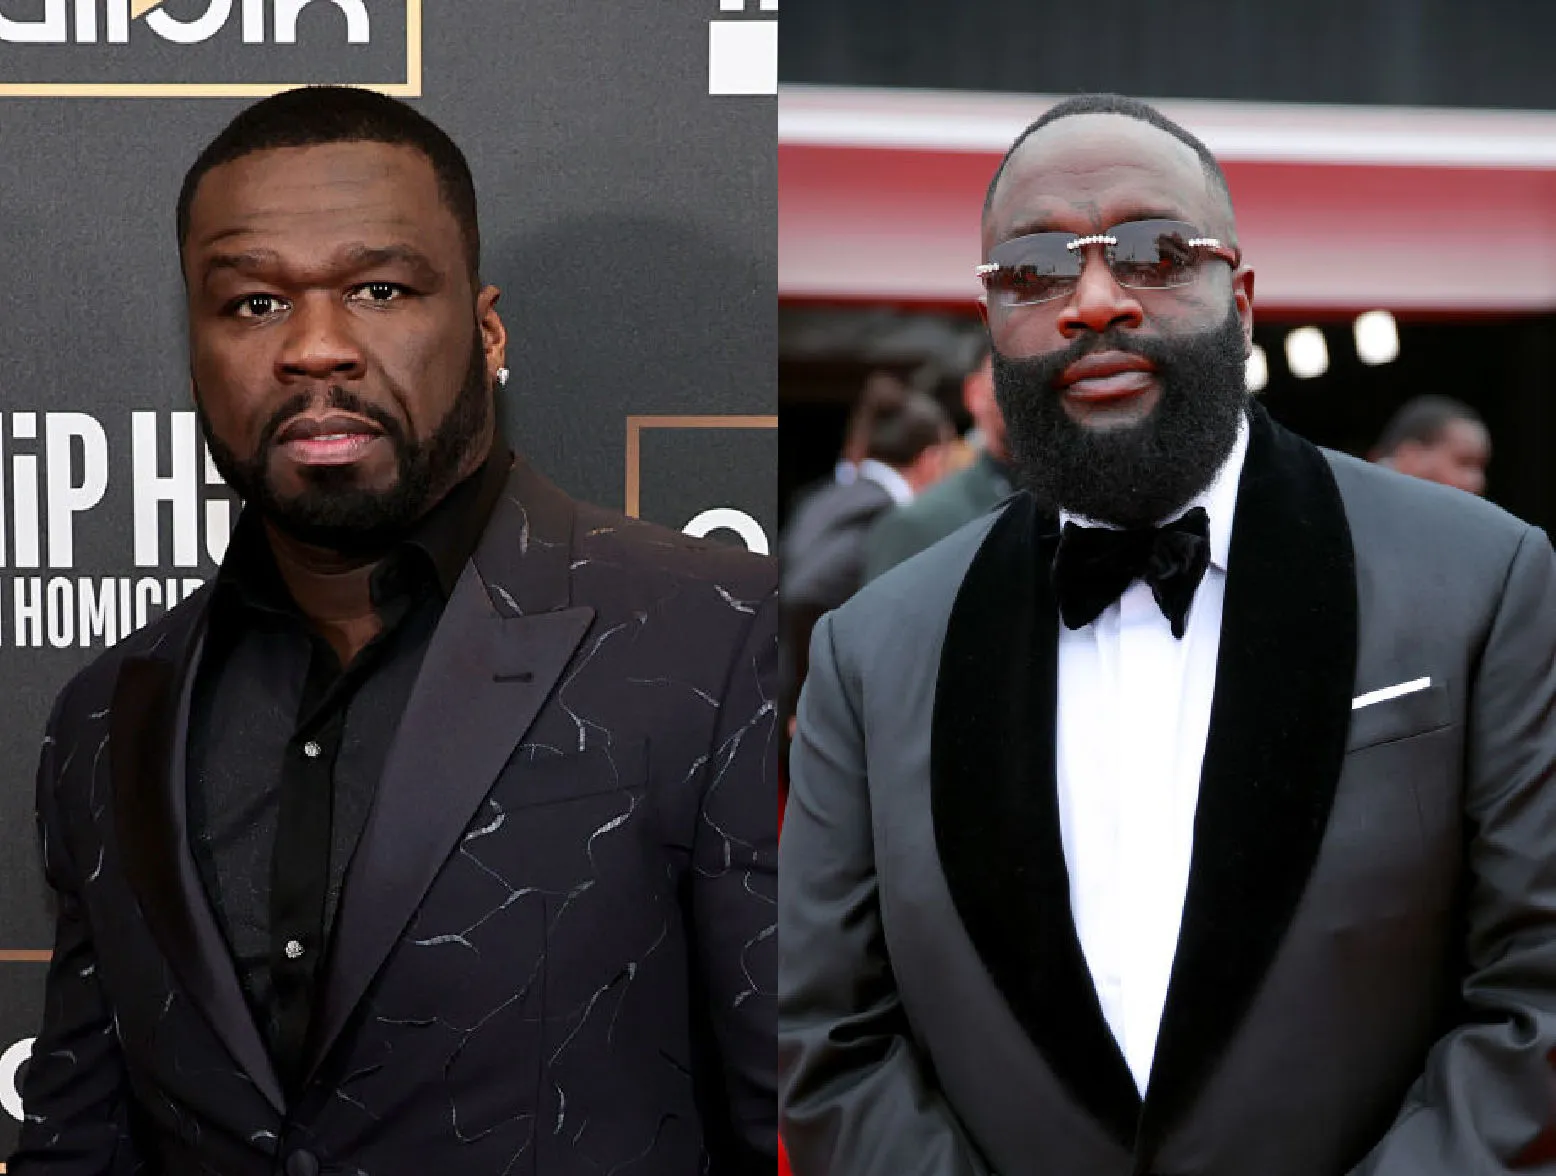 Rick Ross Hits Back at 50 Cent With Accusations From Daphne Joy in Response to Social Media Beef Over Rap Lyrics